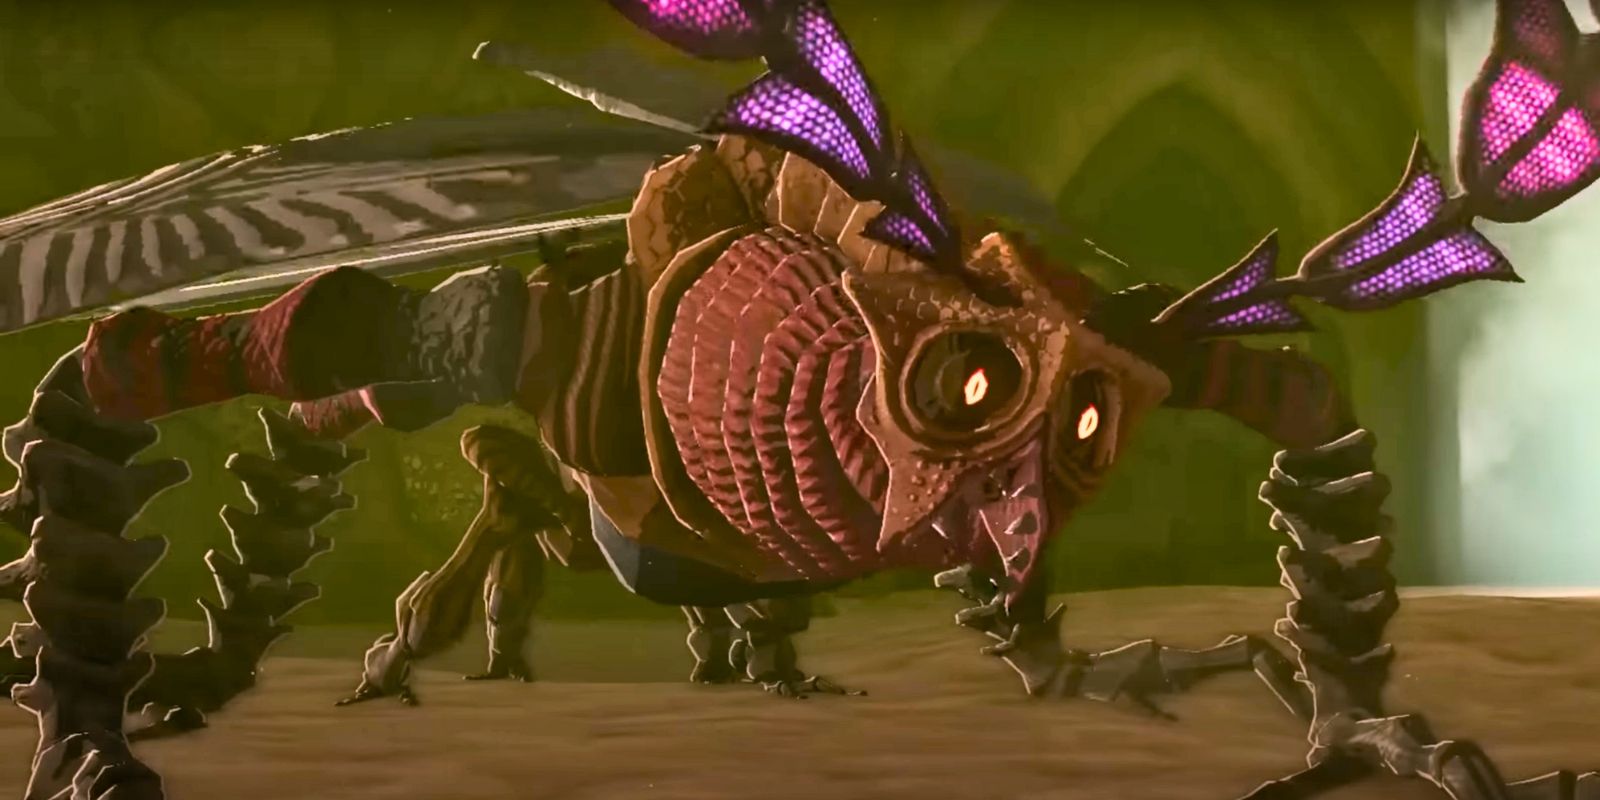 Queen Gibdo with all of her insect legs placed firmly on the ground, ready for a boss battle in Zelda: Tears of the Kingdom.